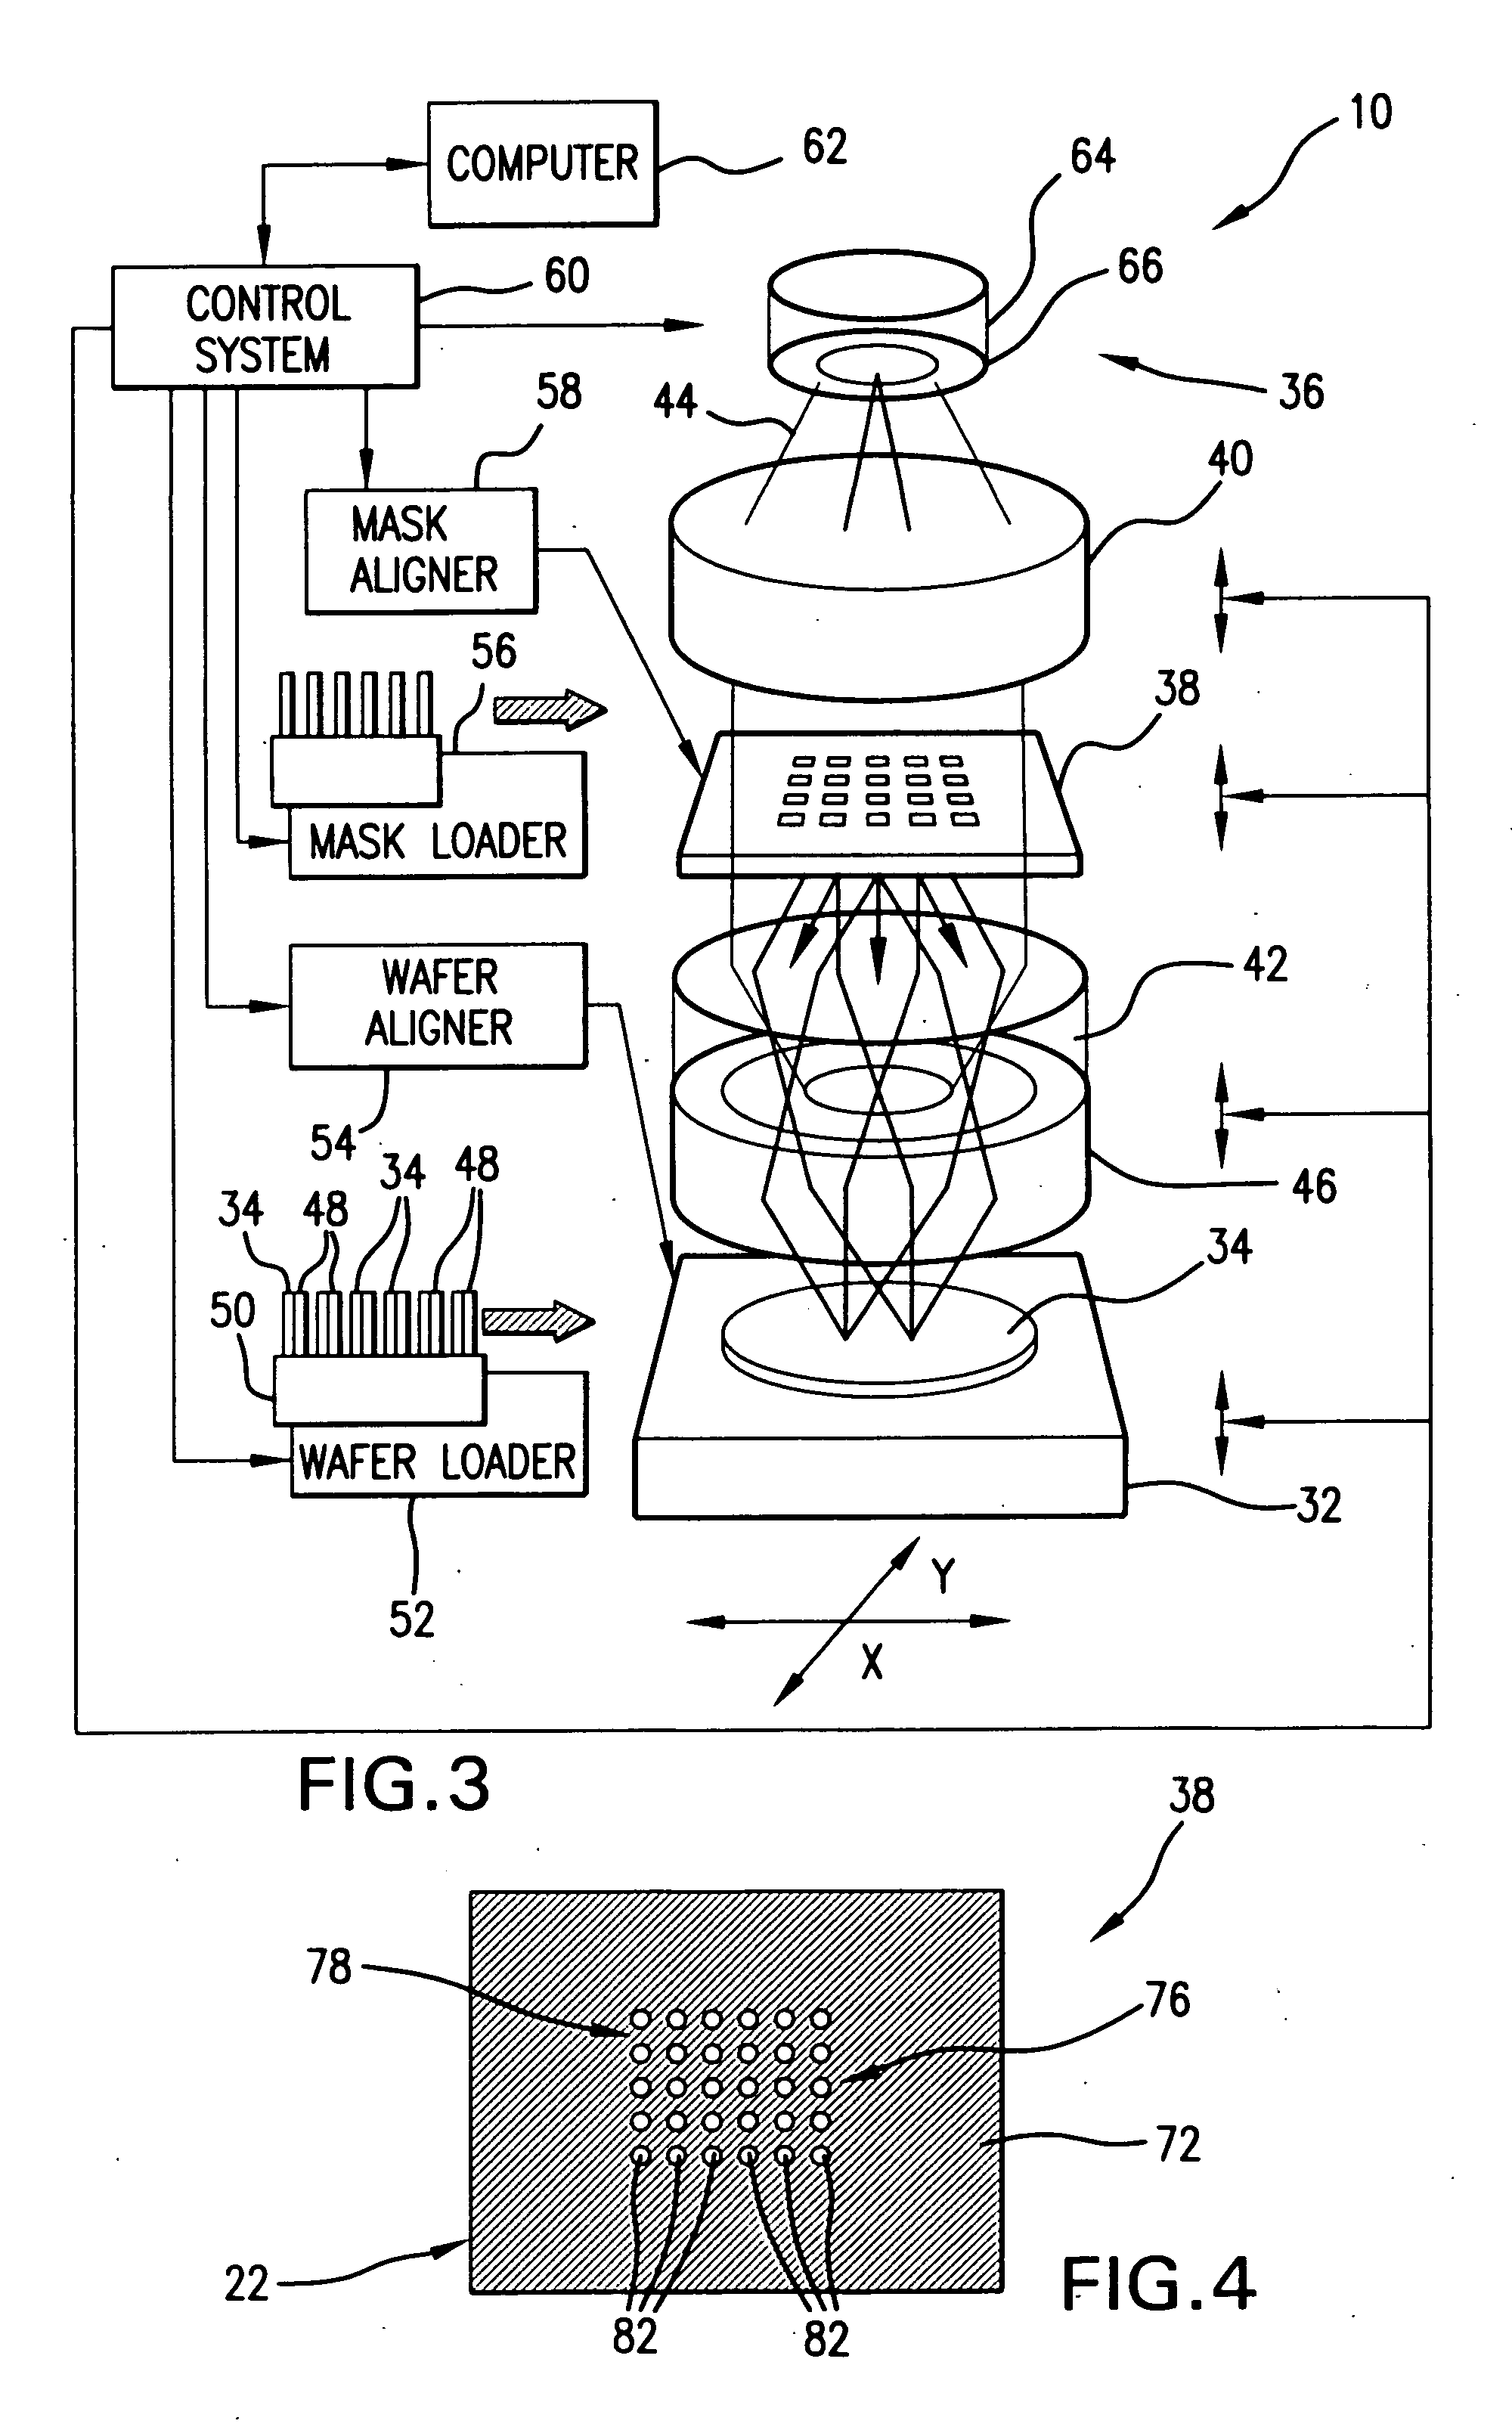 Stepper system for ultra-high resolution photolithography using photolithographic mask exhibiting enhanced light transmission due to utilizing sub-wavelength aperture arrays